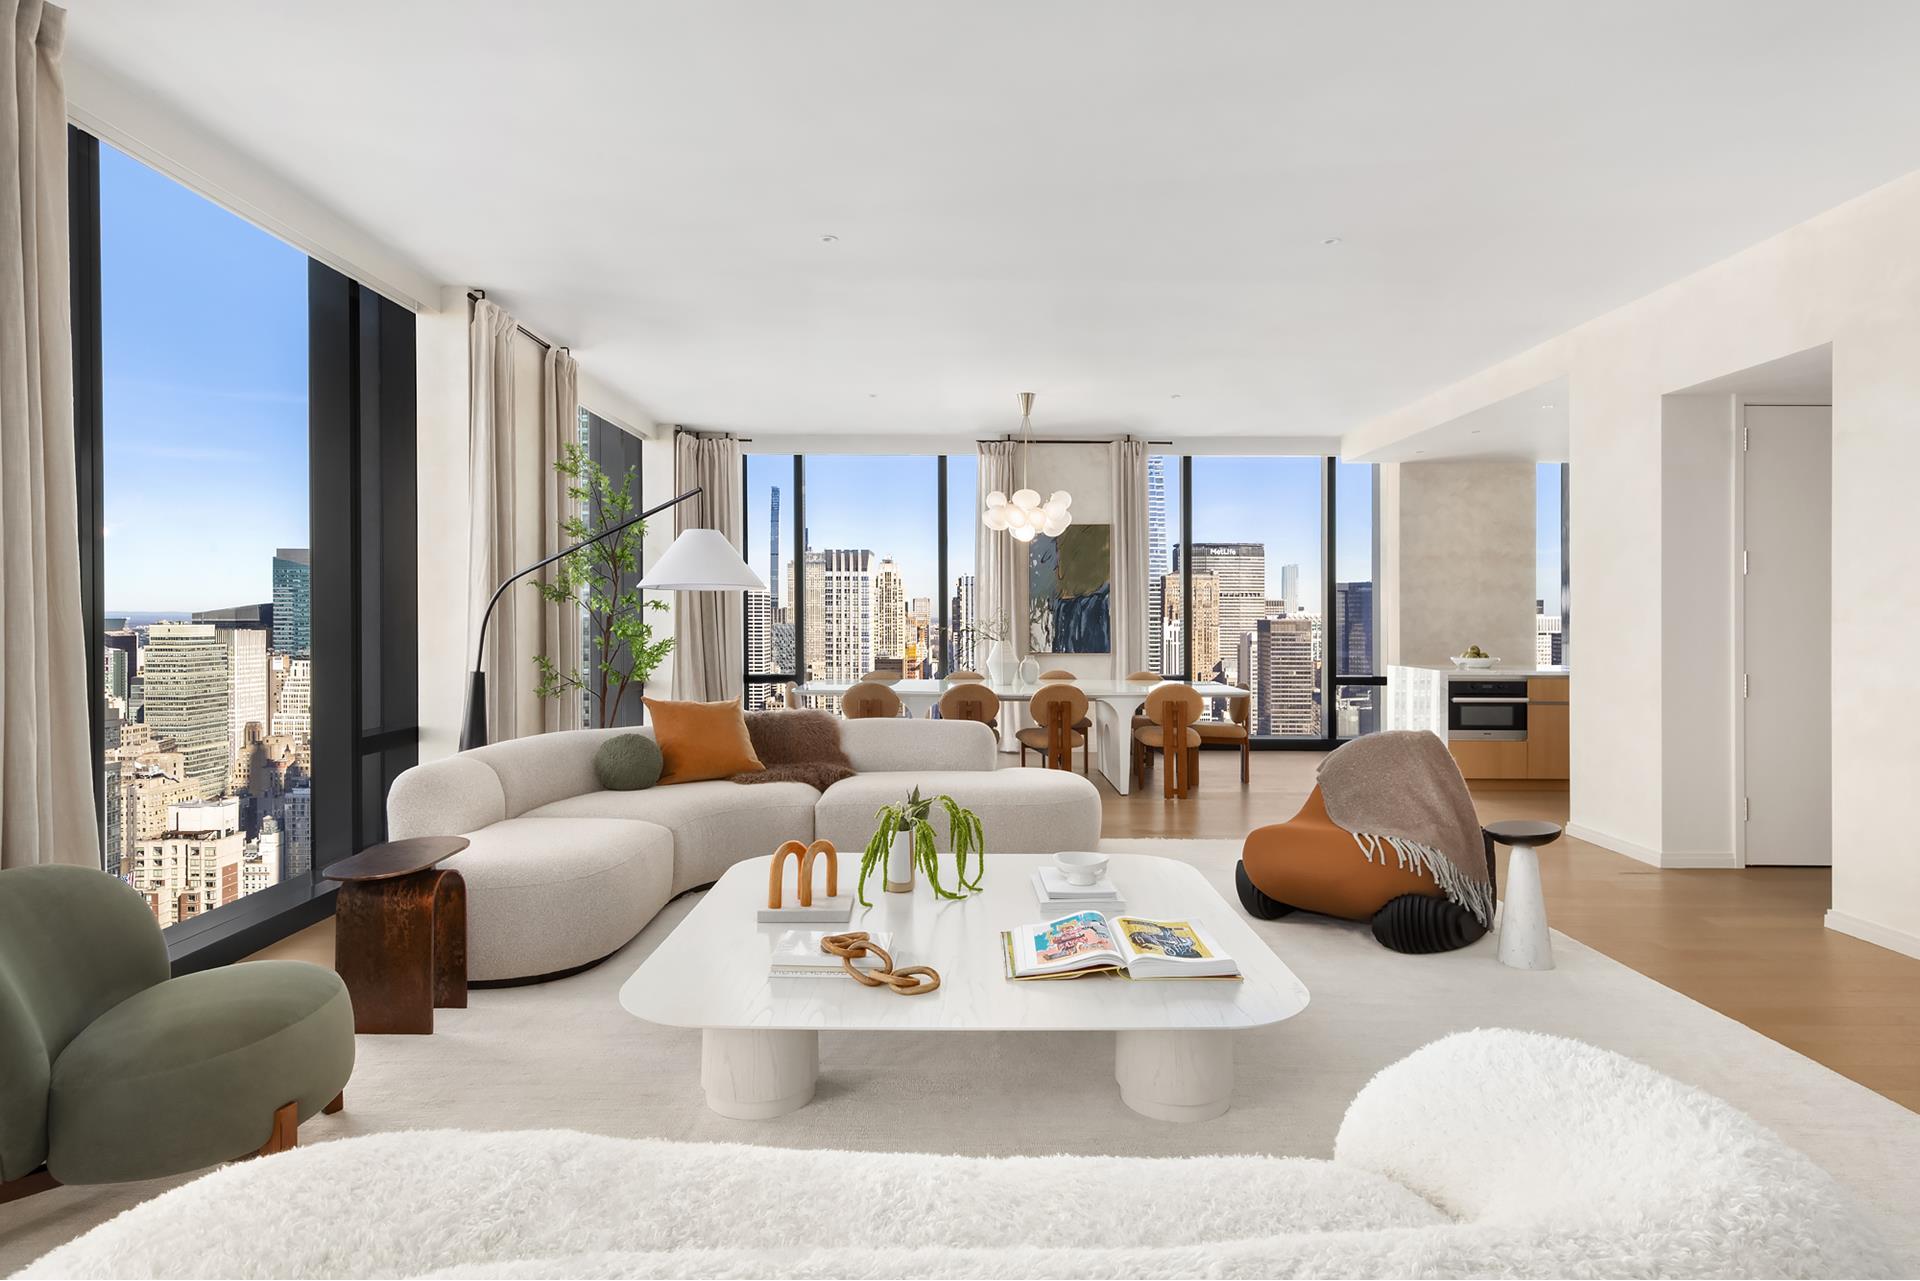 277 5th Avenue Ph53, Nomad, Downtown, NYC - 4 Bedrooms  
4 Bathrooms  
8 Rooms - 